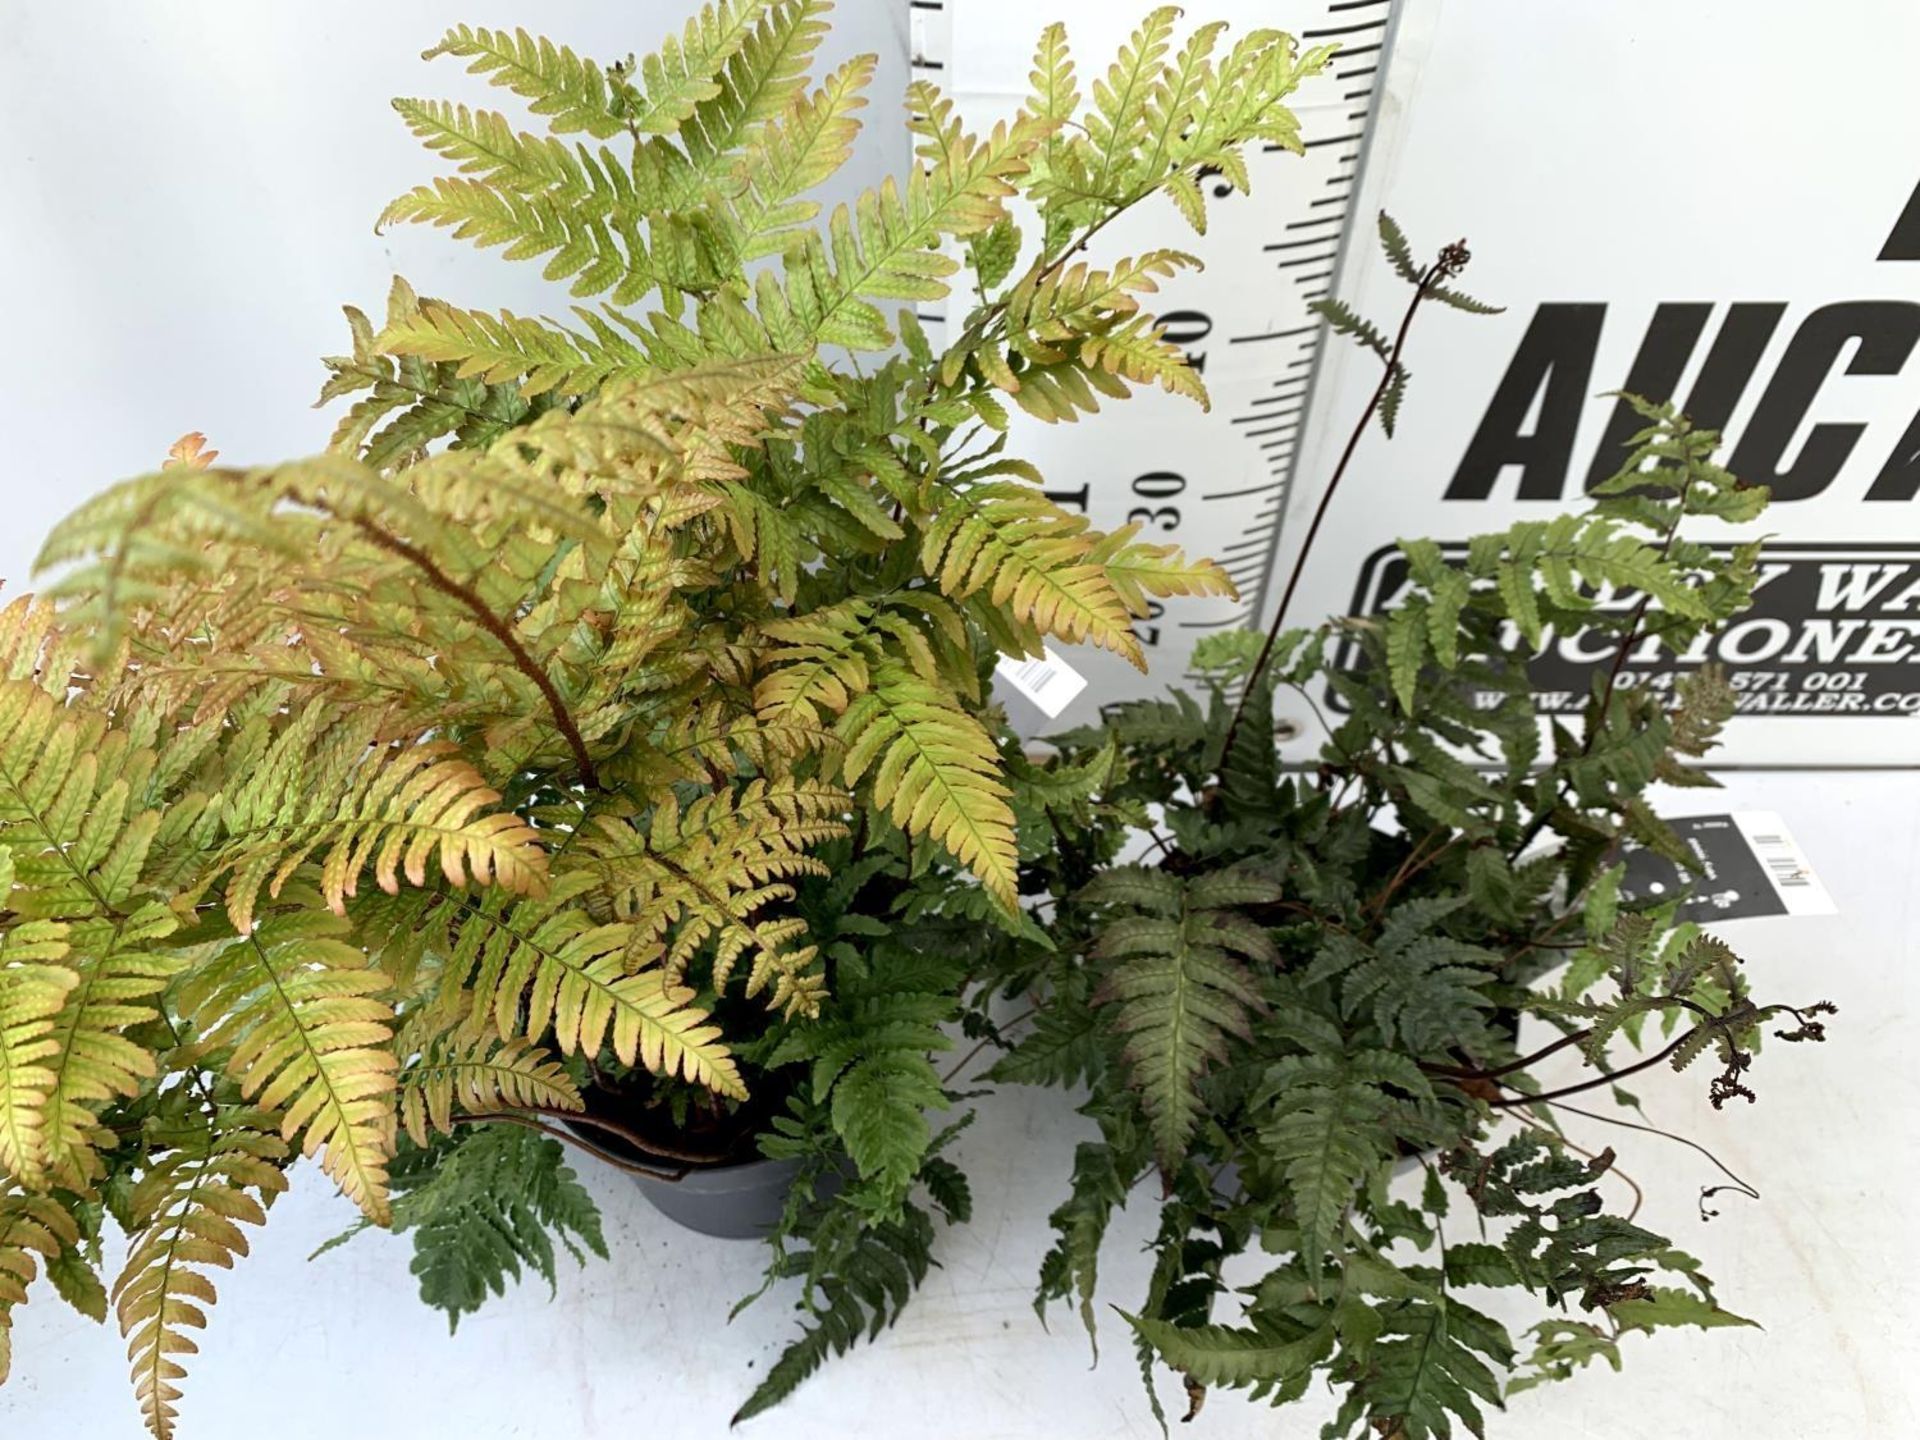 TWO LARGE ELEGRASS FERNS POLYSTICHUM AND ANISOCAMPIUM SHEARERI IN 3 LTR POTS 30-60CM TALL TO BE SOLD - Image 4 of 12